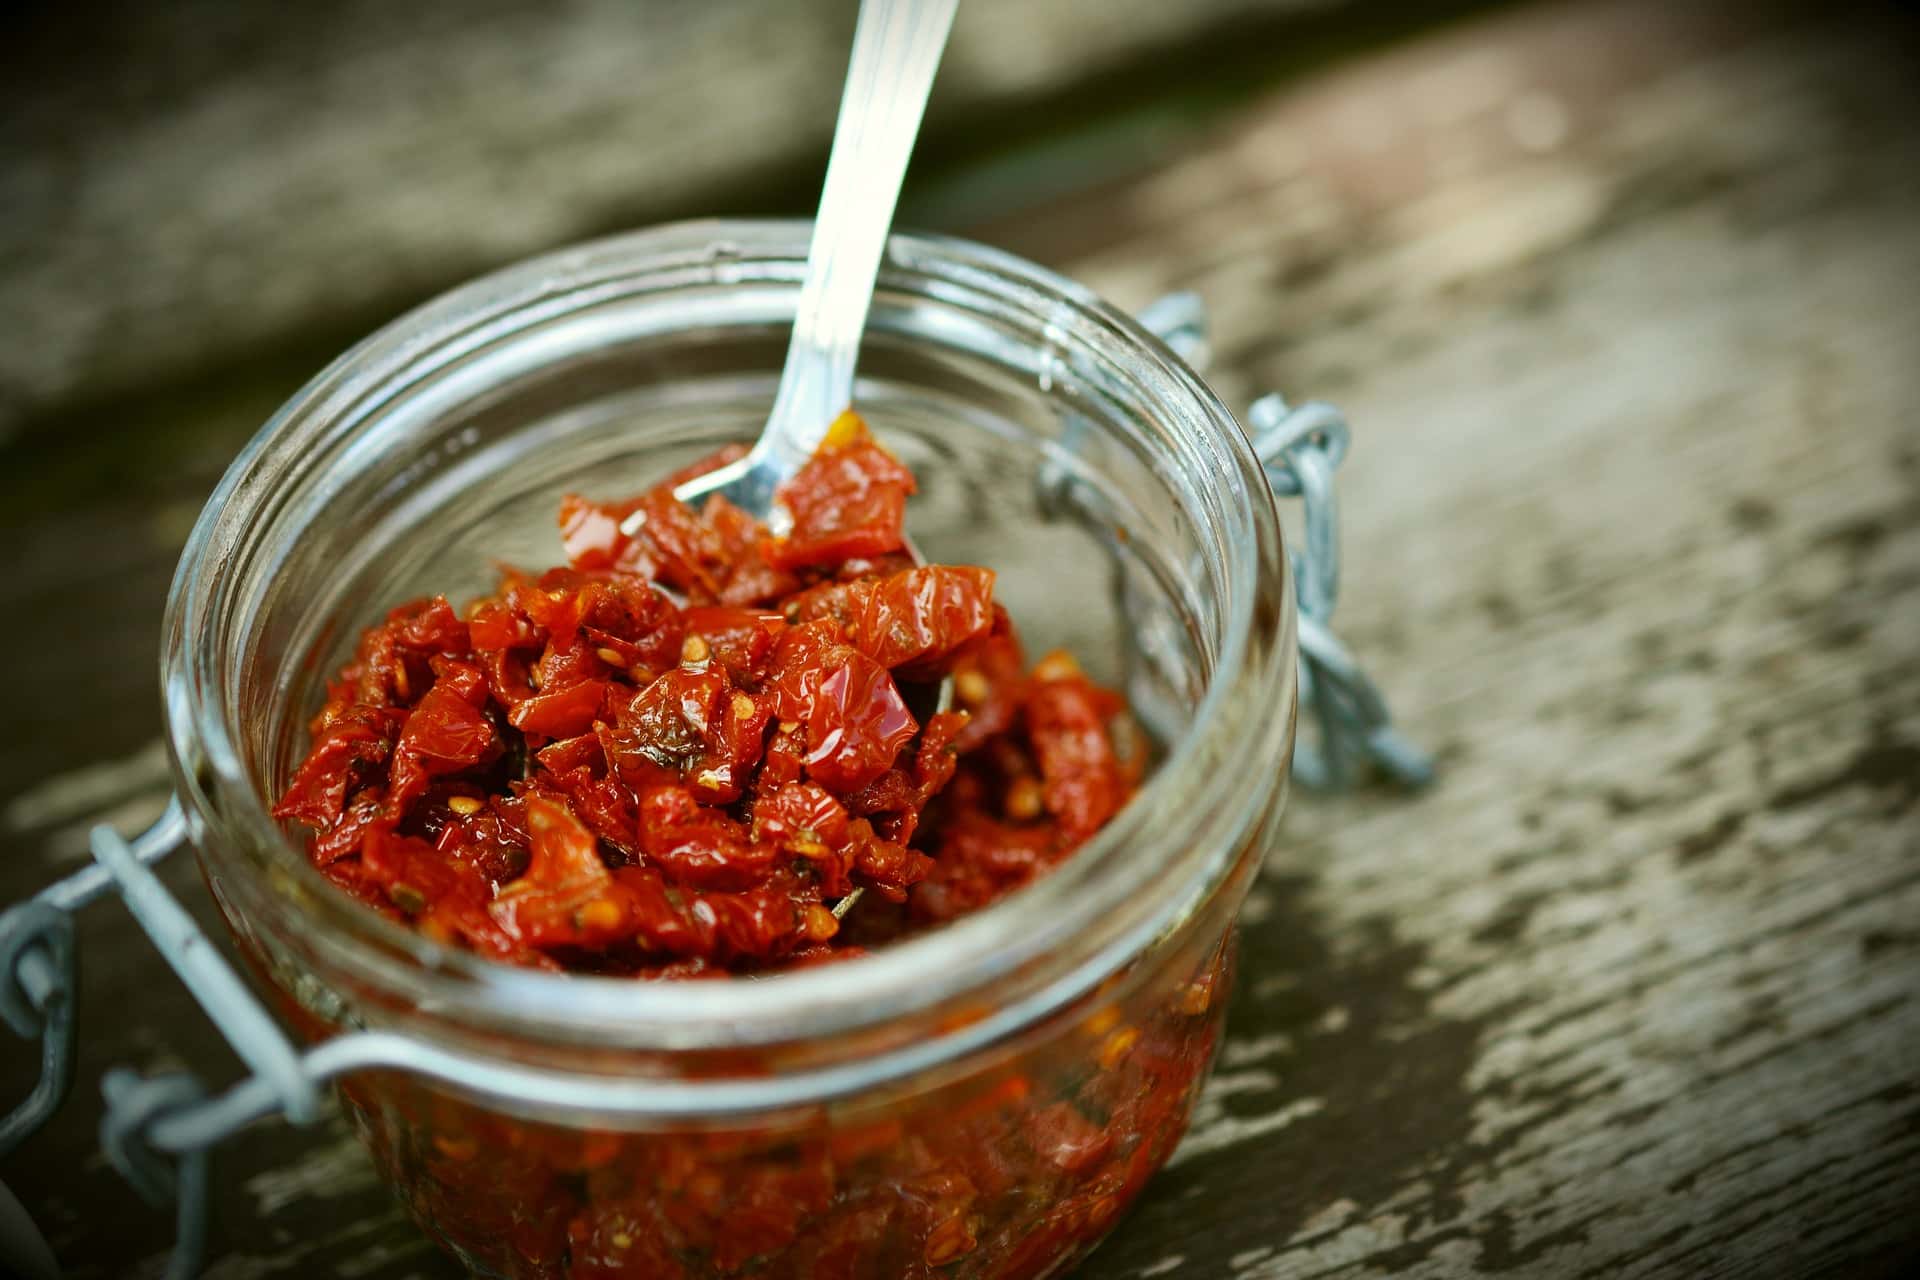 Substitute for Sun-Dried Tomatoes